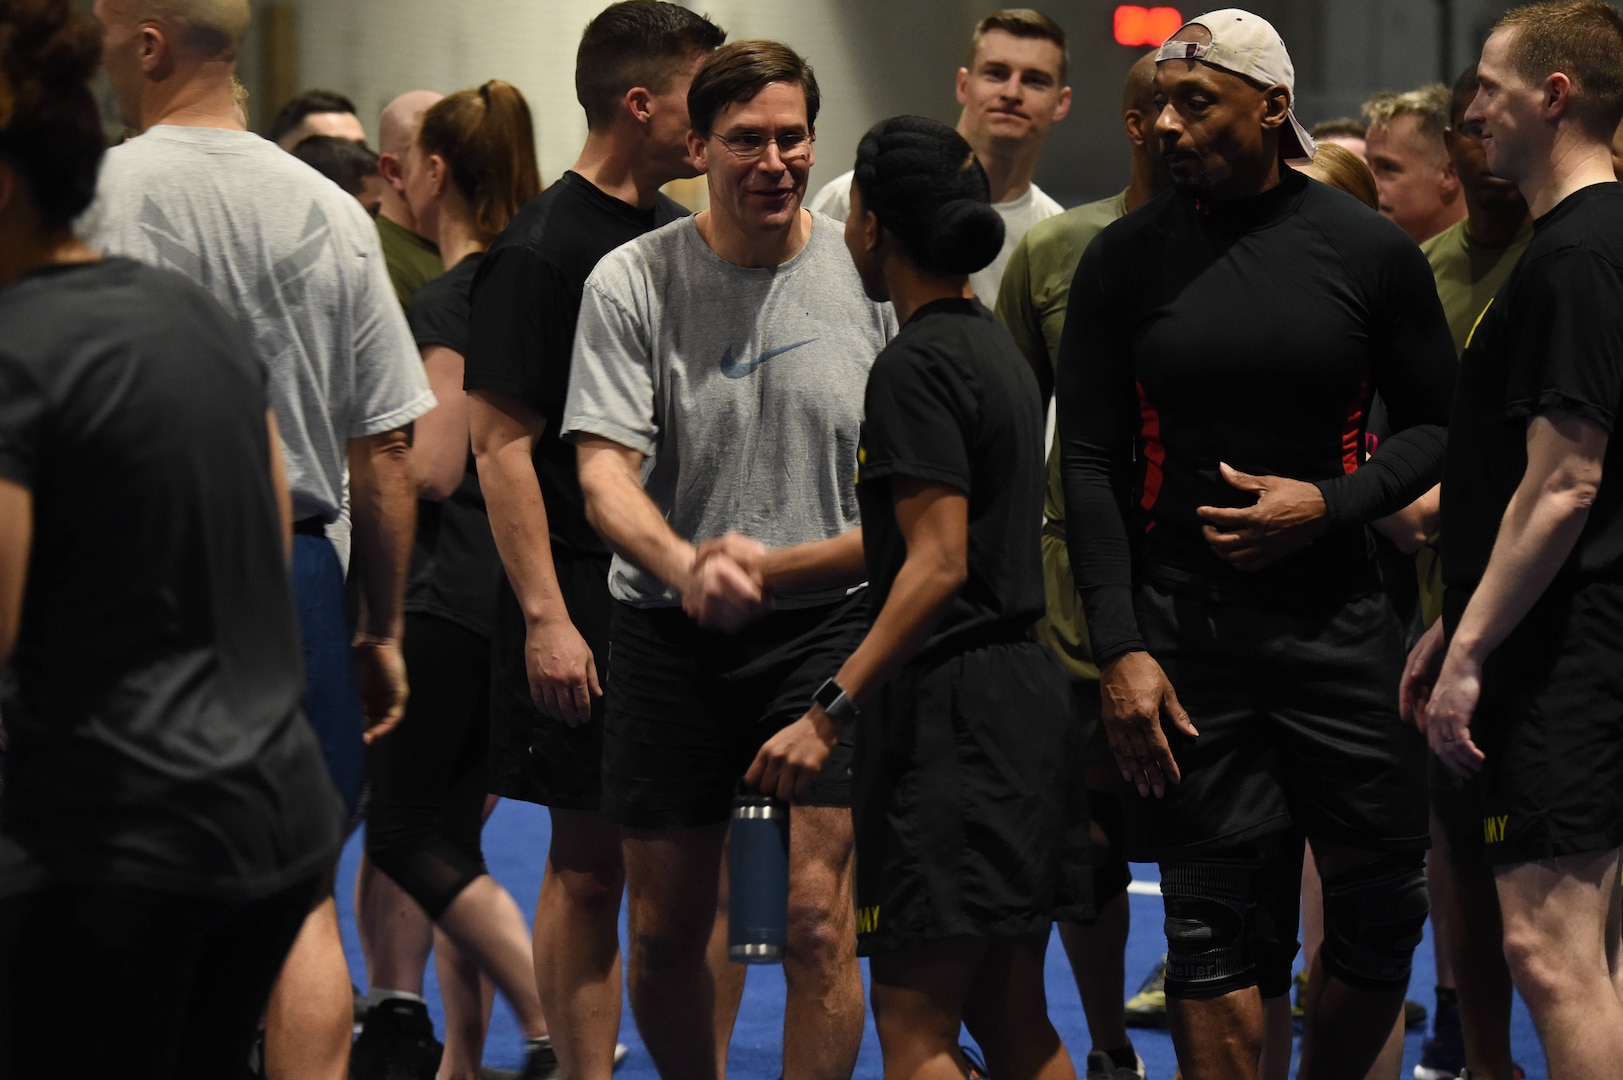 Secretary of Defense Dr. Mark T. Esper engages with U.S. Strategic Command (USSTRATCOM) and 55th Wing service members at the field house at Offutt Air Force Base, Neb., Feb. 20, 2020. Esper participated in circuit training with more than 40 USSTRATCOM and 55th Wing employees, following up the workout with a question and answer session.